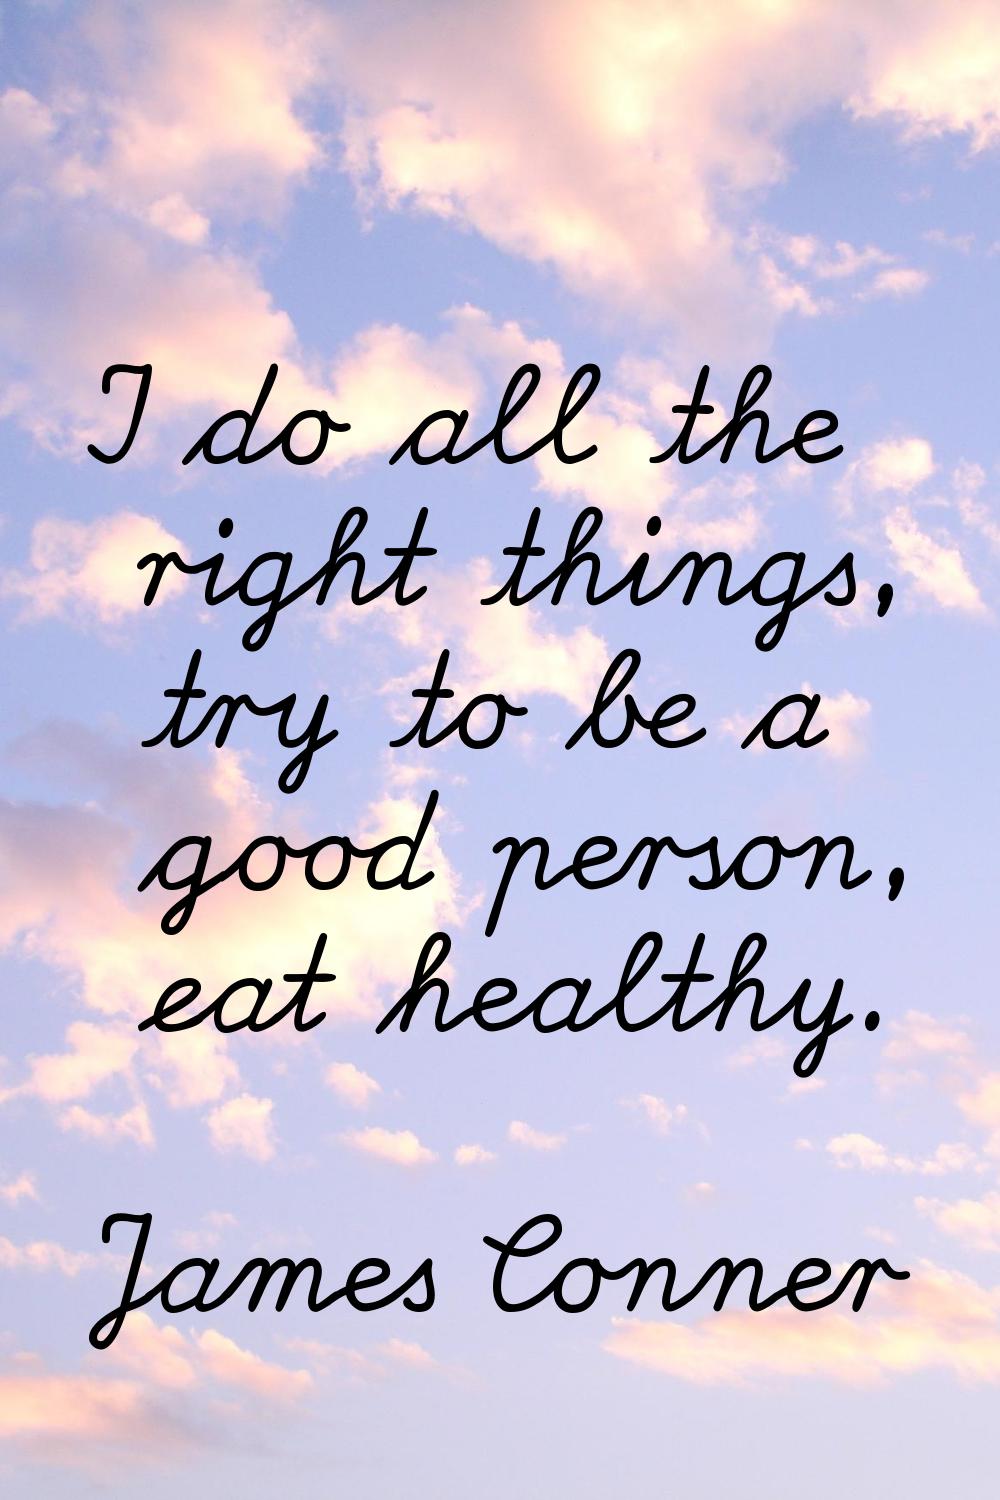 I do all the right things, try to be a good person, eat healthy.